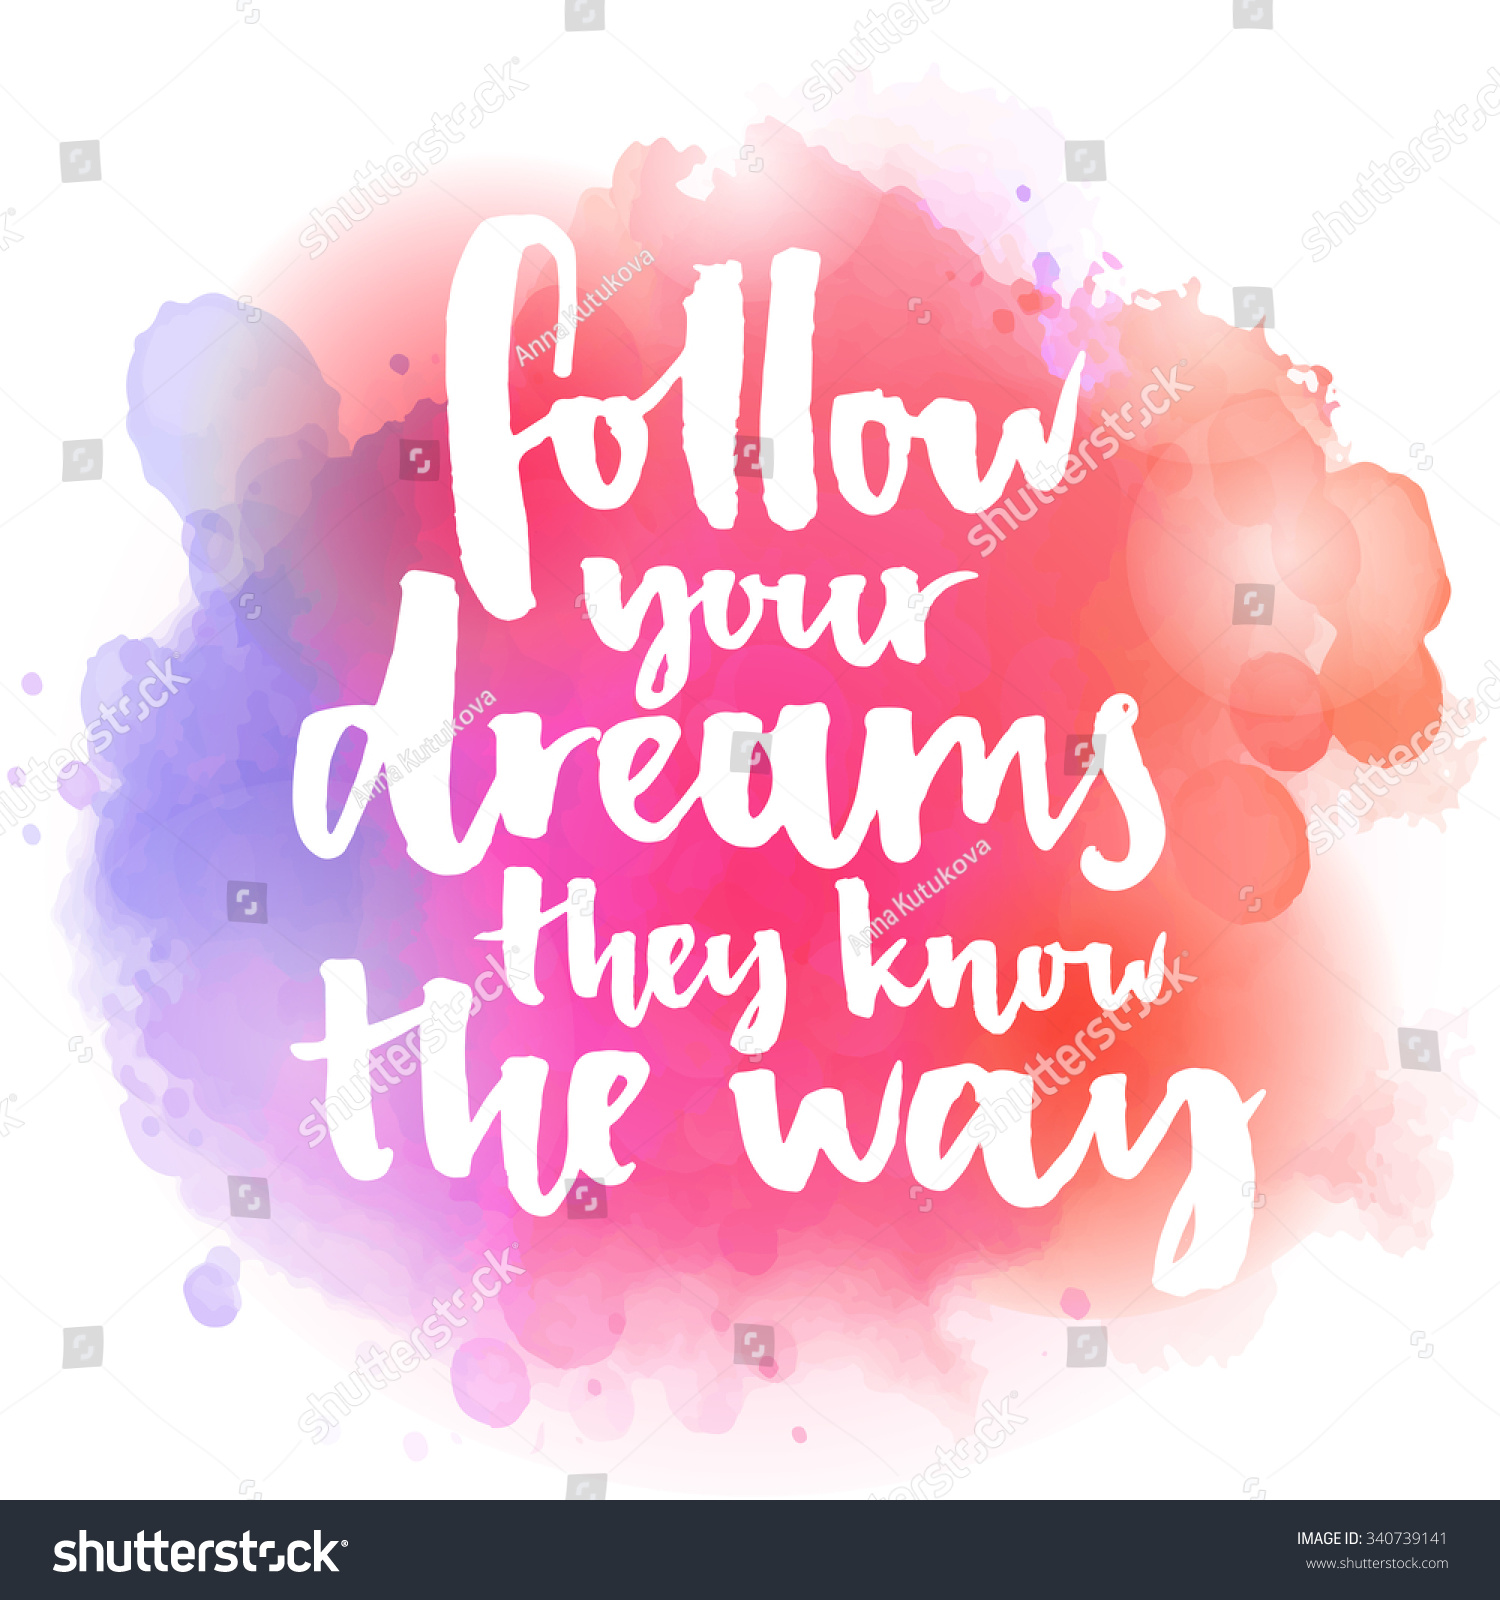 Follow your dreams they know the way Inspirational quote about life and love